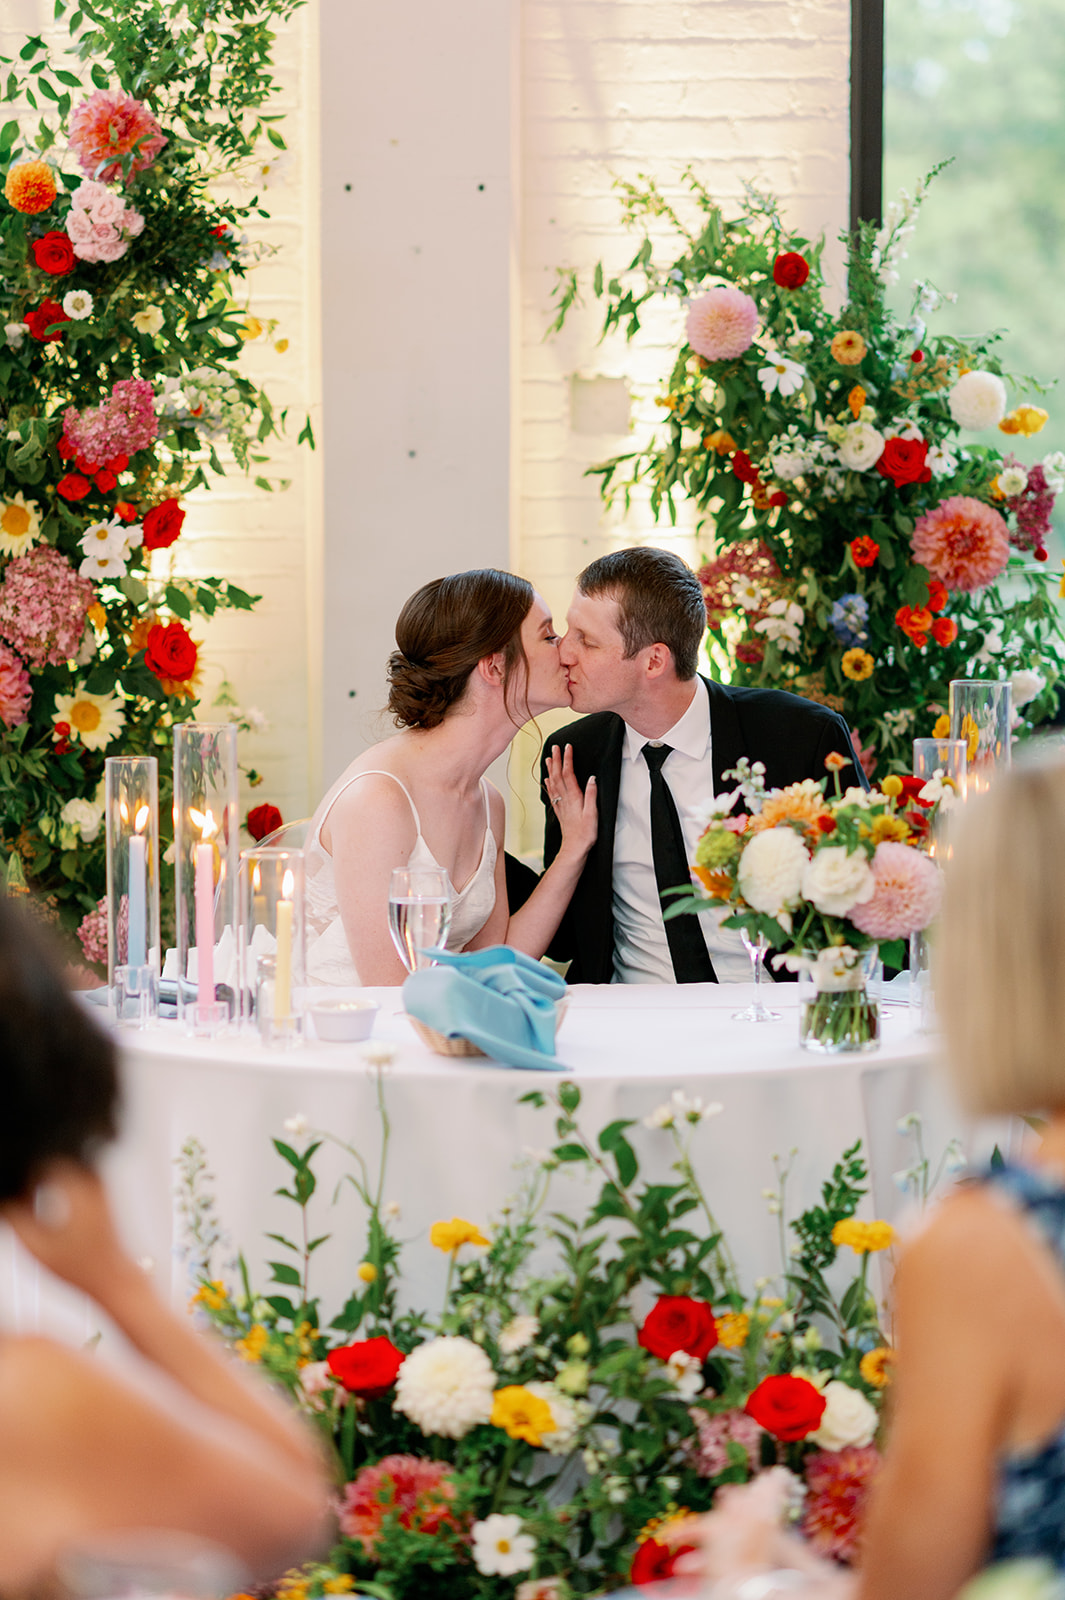 Newlyweds kiss while sitting at their reception table surrounded by colorful flowers